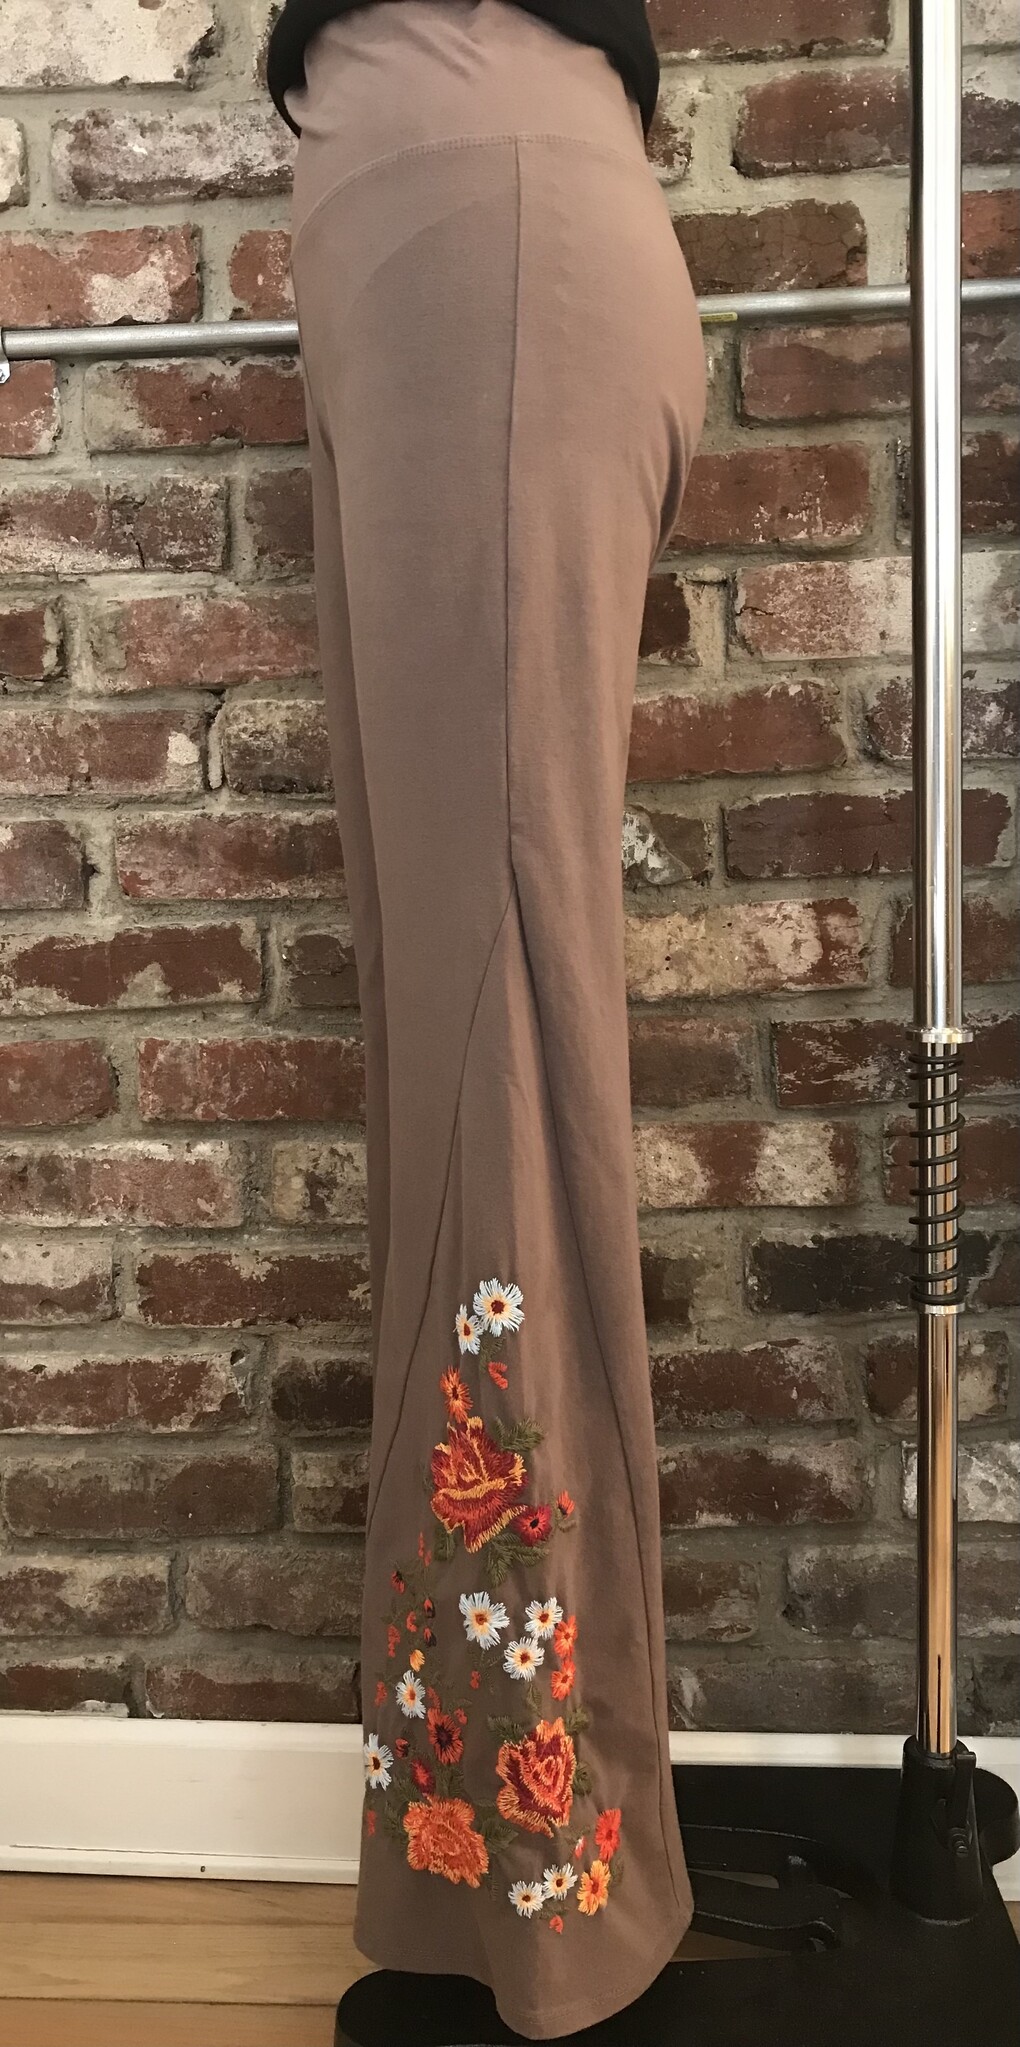 T Party "Flower Power" Embroidered Flare Pants